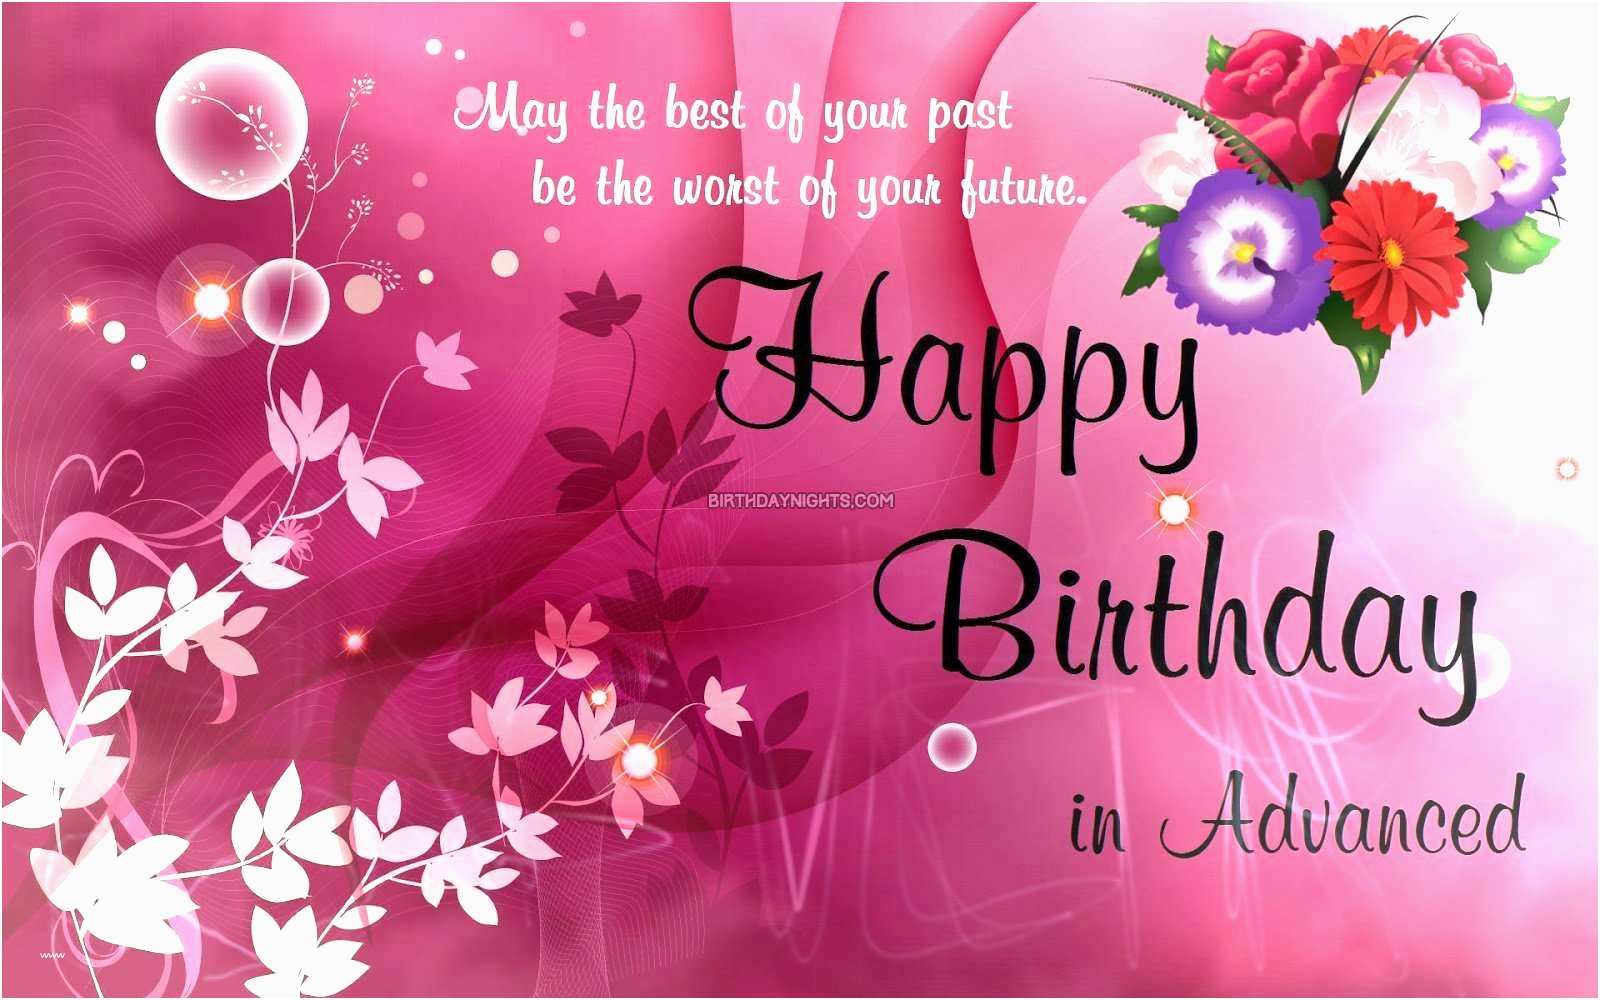 Happy Birthday Wishes Wallpapers Free - Wallpaper Cave